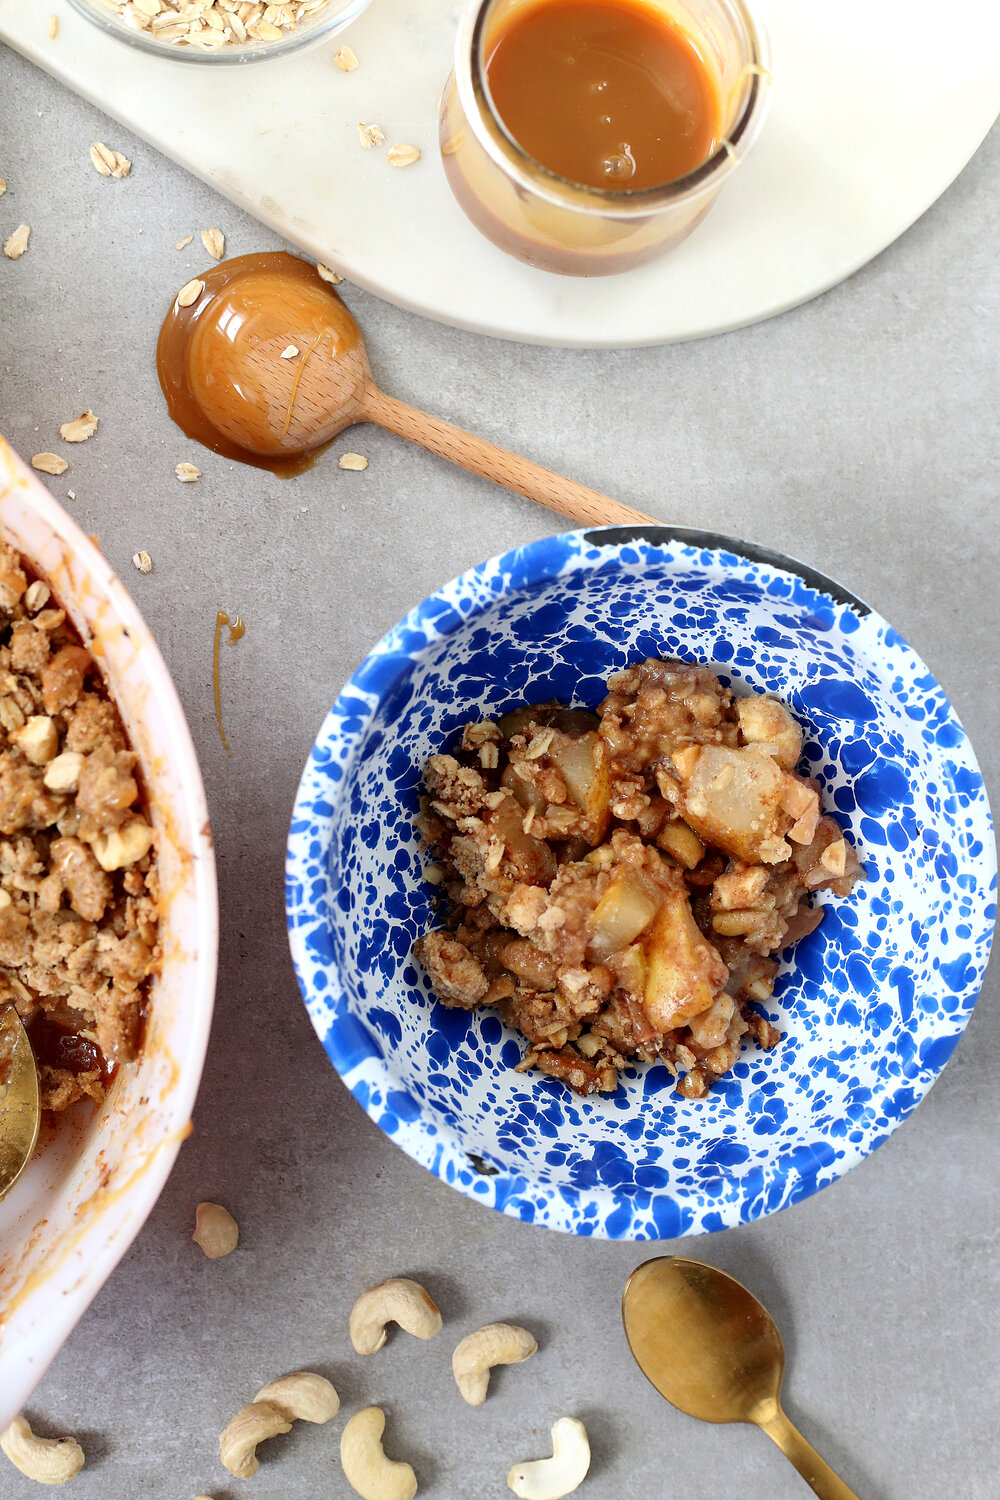 An easy Apple & Pear Crisp with Cashew Topping via UnusuallyLovely.com